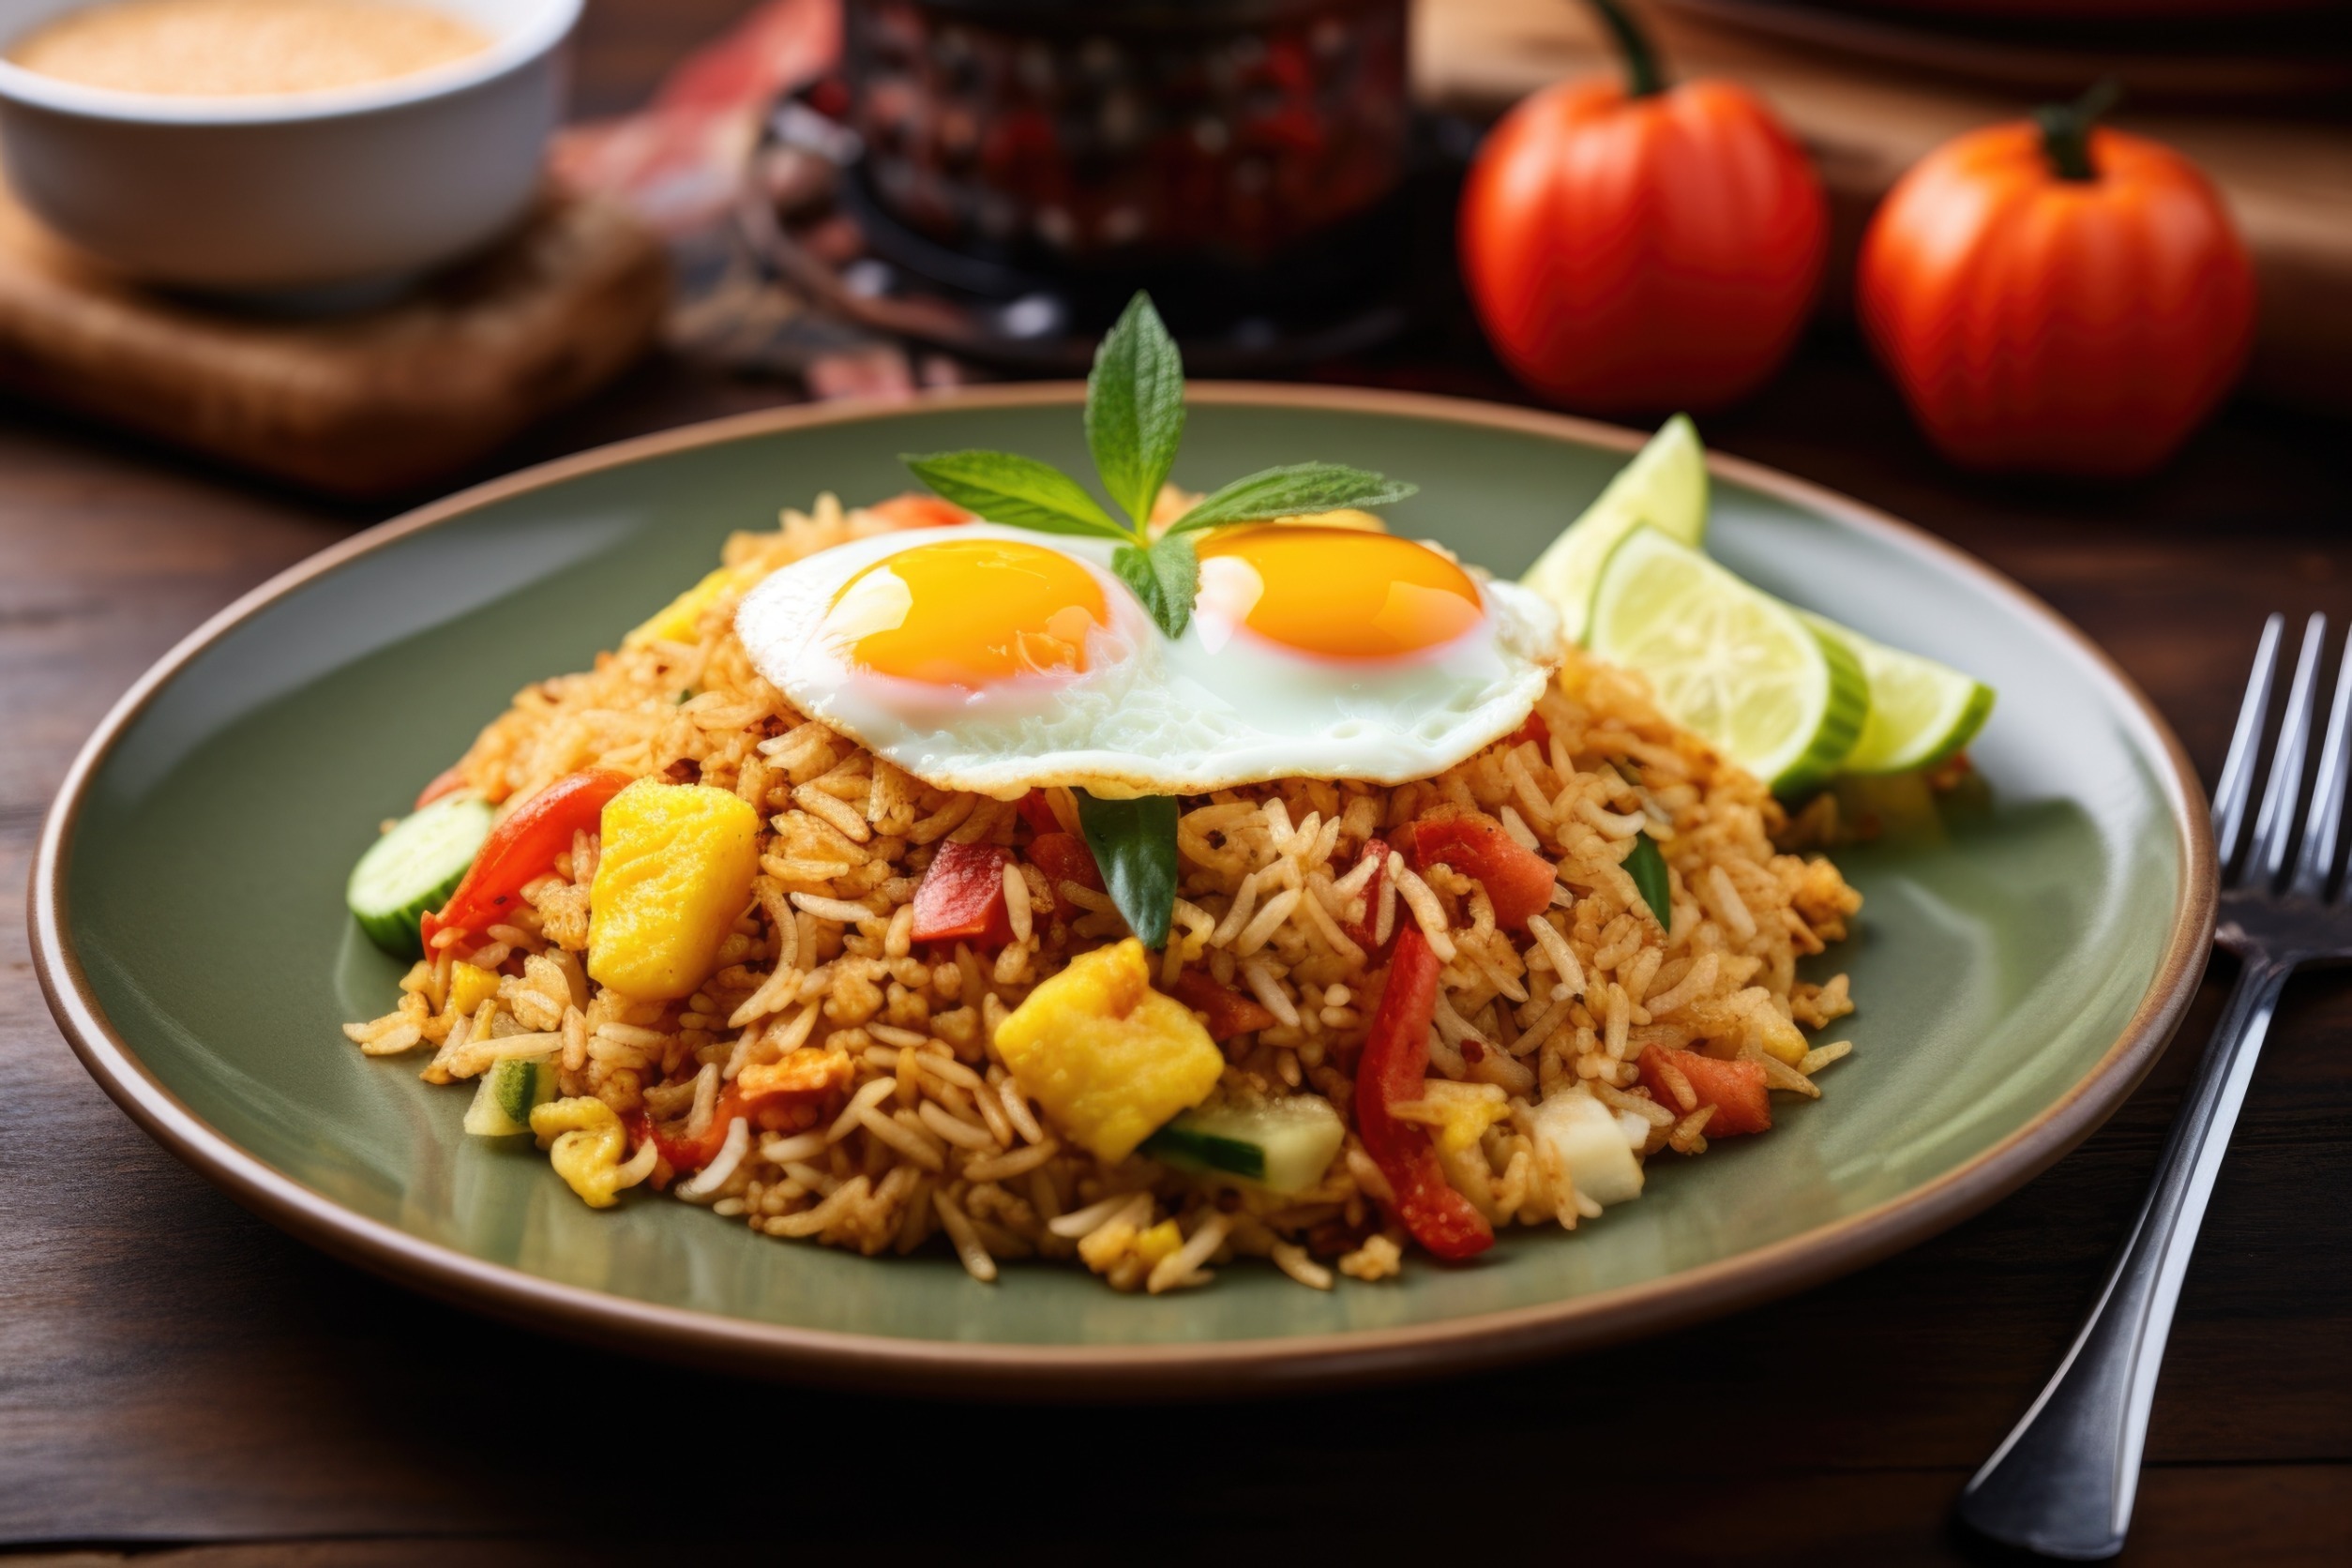 indonesian nasi goreng fried rice on a plate.